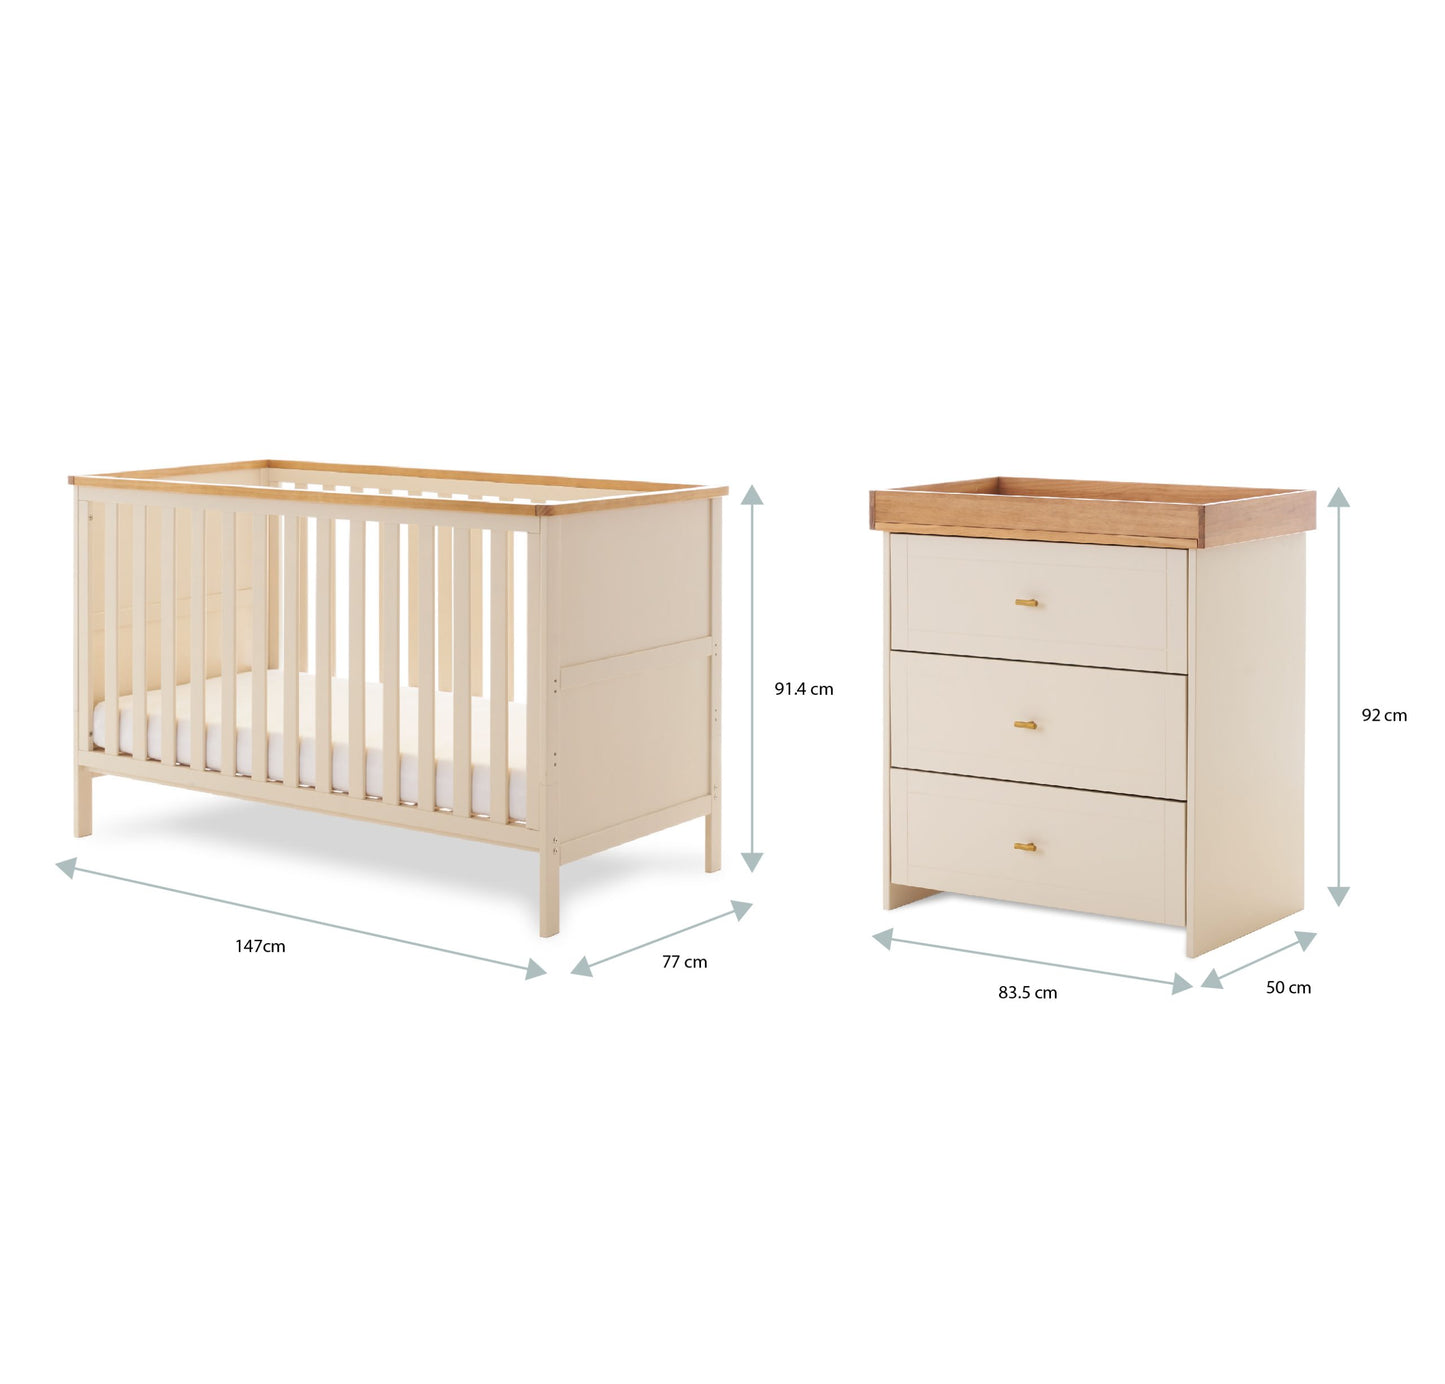 Obaby Evie 2 Piece Set with Cot Bed and Dresser Changer